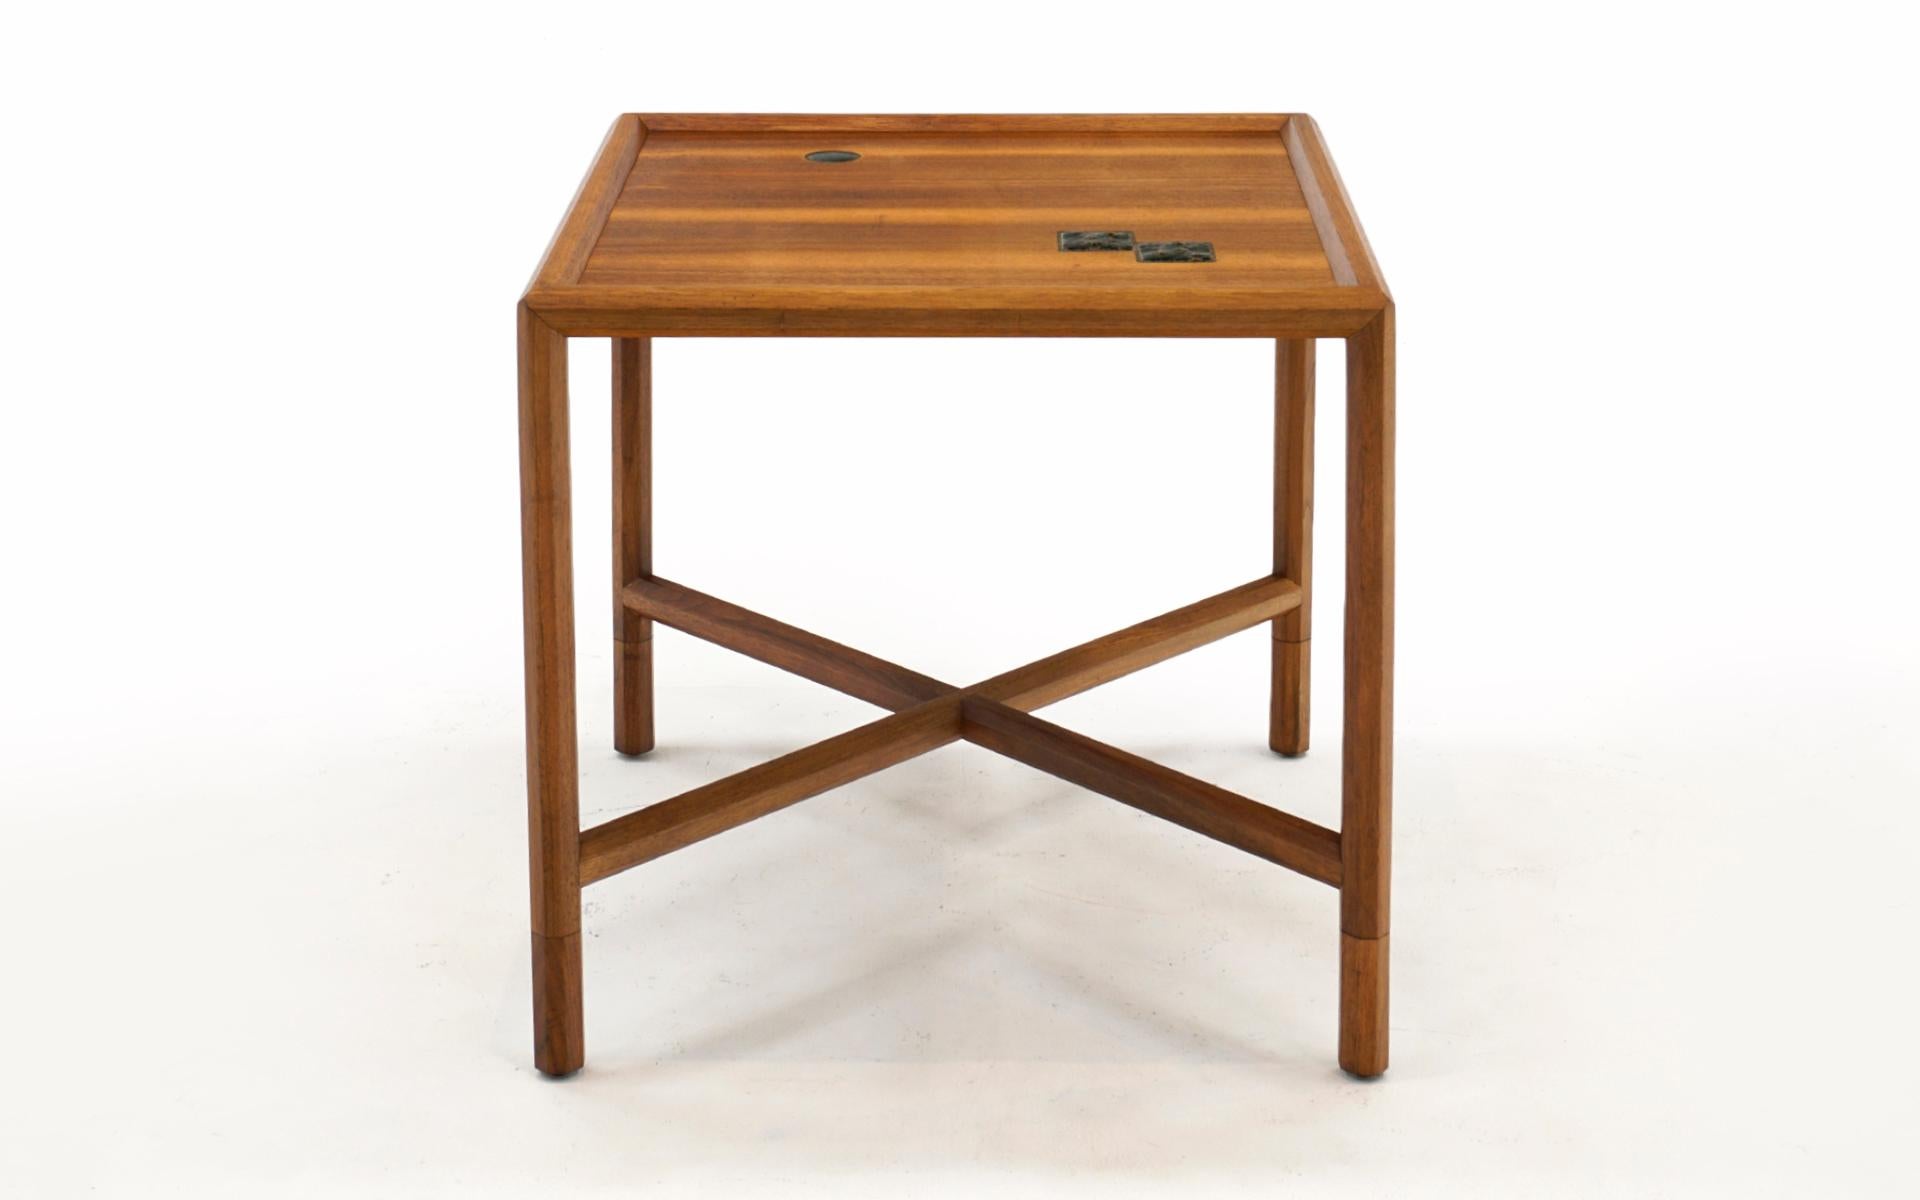 Exquisite side table in African Mahogany with embedded Otto and Gertrude Natzler ceramic tiles designed by Edward Wormley for Dunbar. Look closely at the photos and see the expert craftsmanship. Each leg and the X cross stretchers are hexagonal. The